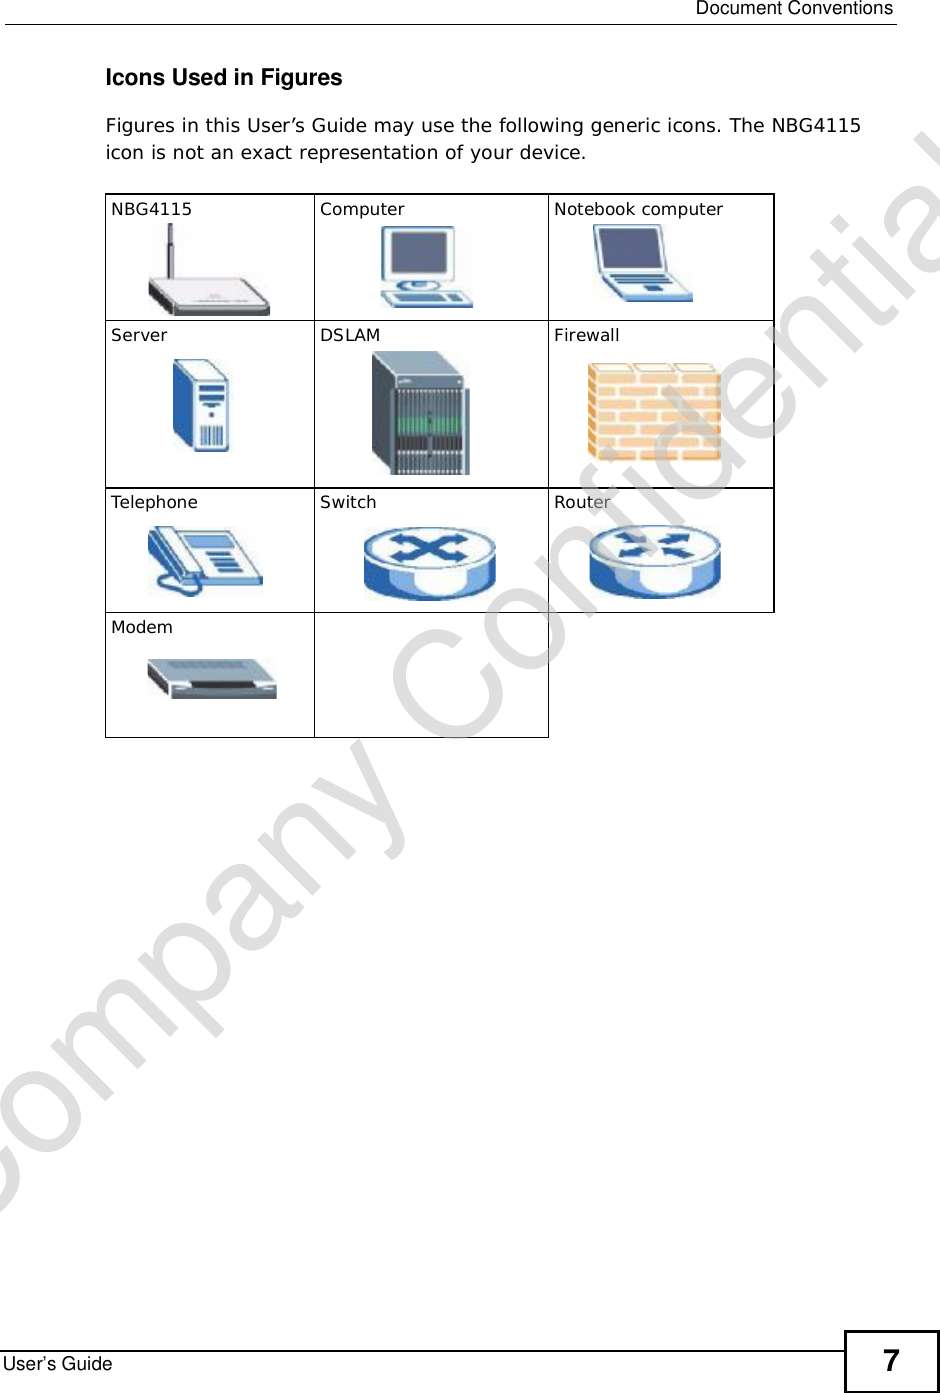  Document ConventionsUser’s Guide 7Icons Used in FiguresFigures in this User’s Guide may use the following generic icons. The NBG4115 icon is not an exact representation of your device.NBG4115 Computer Notebook computerServer DSLAM FirewallTelephone Switch RouterModemCompany Confidential